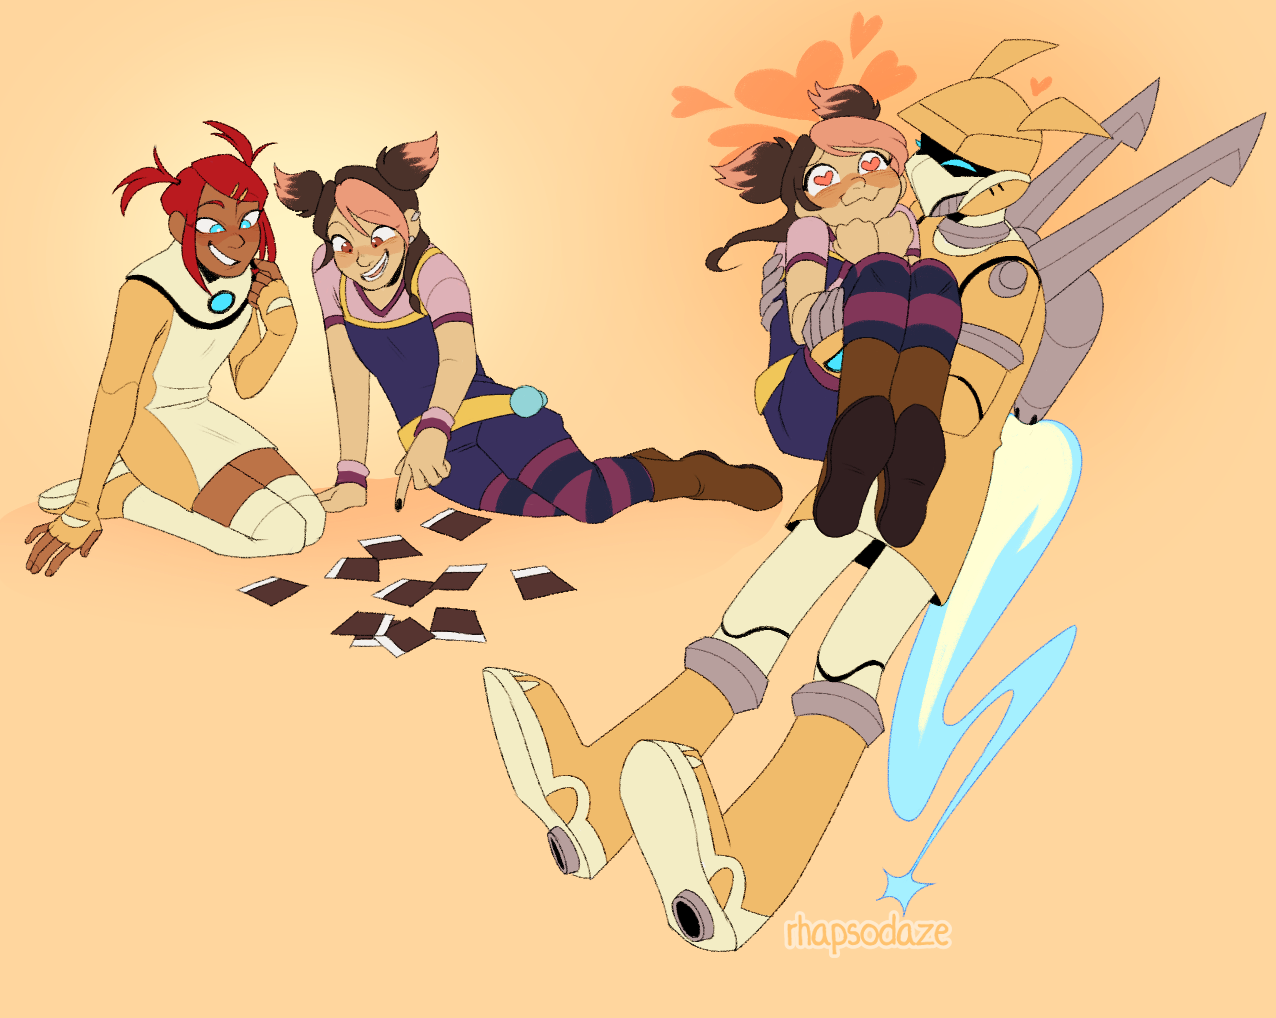 rhapsodaze:"a late entry for the crossover day of tf femslash week.. i...